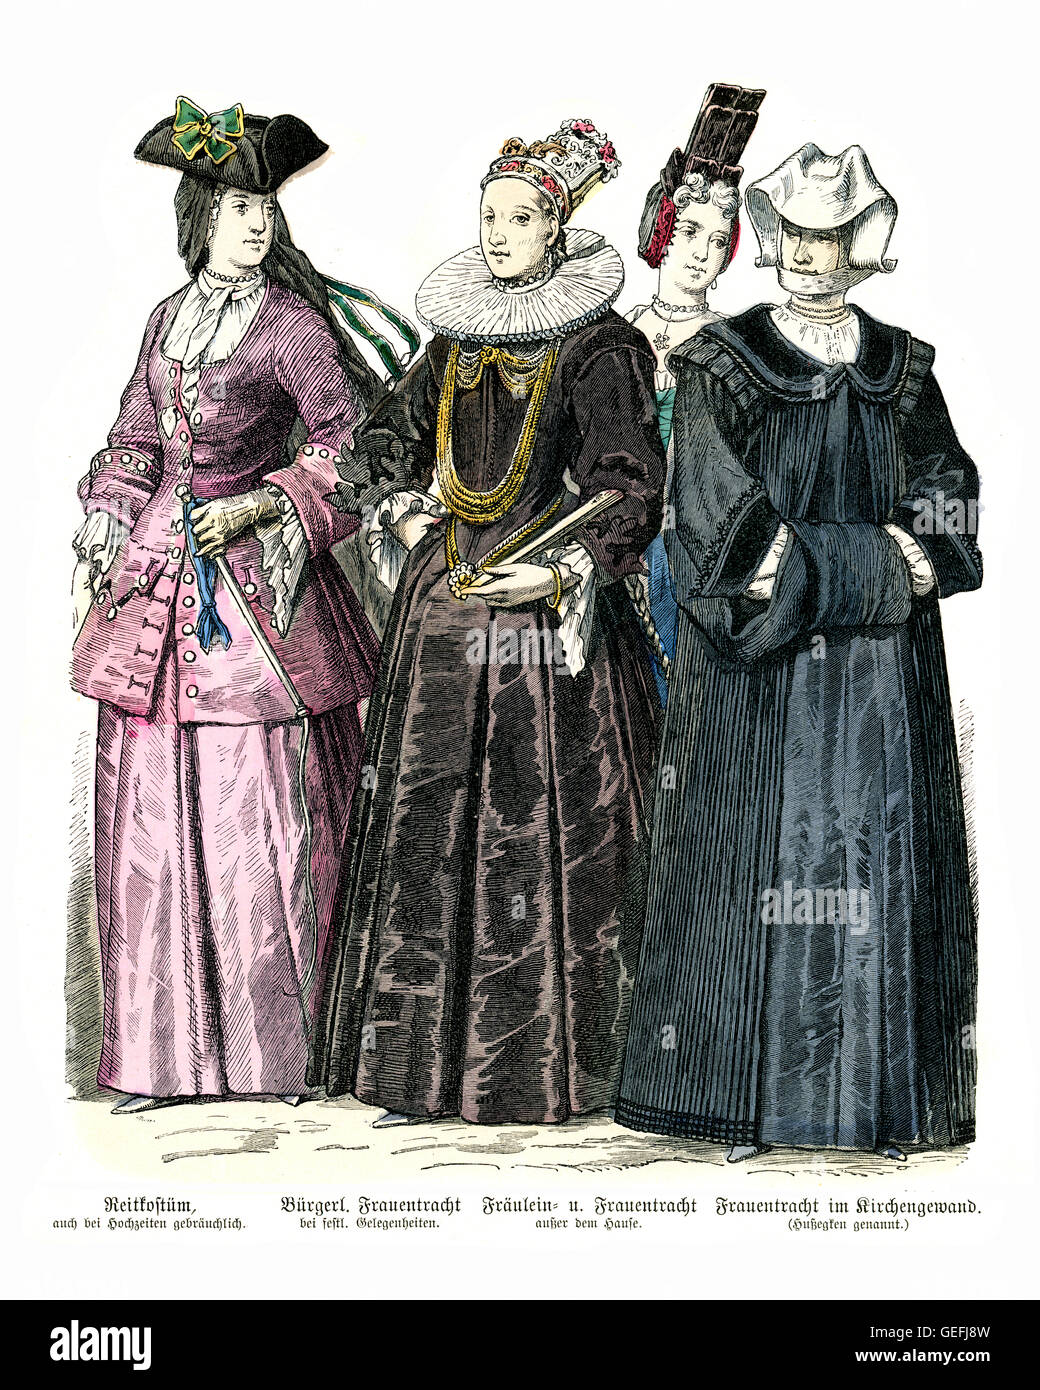 Women's fashions at the start of the 18th Century in Switzerland Stock Photo